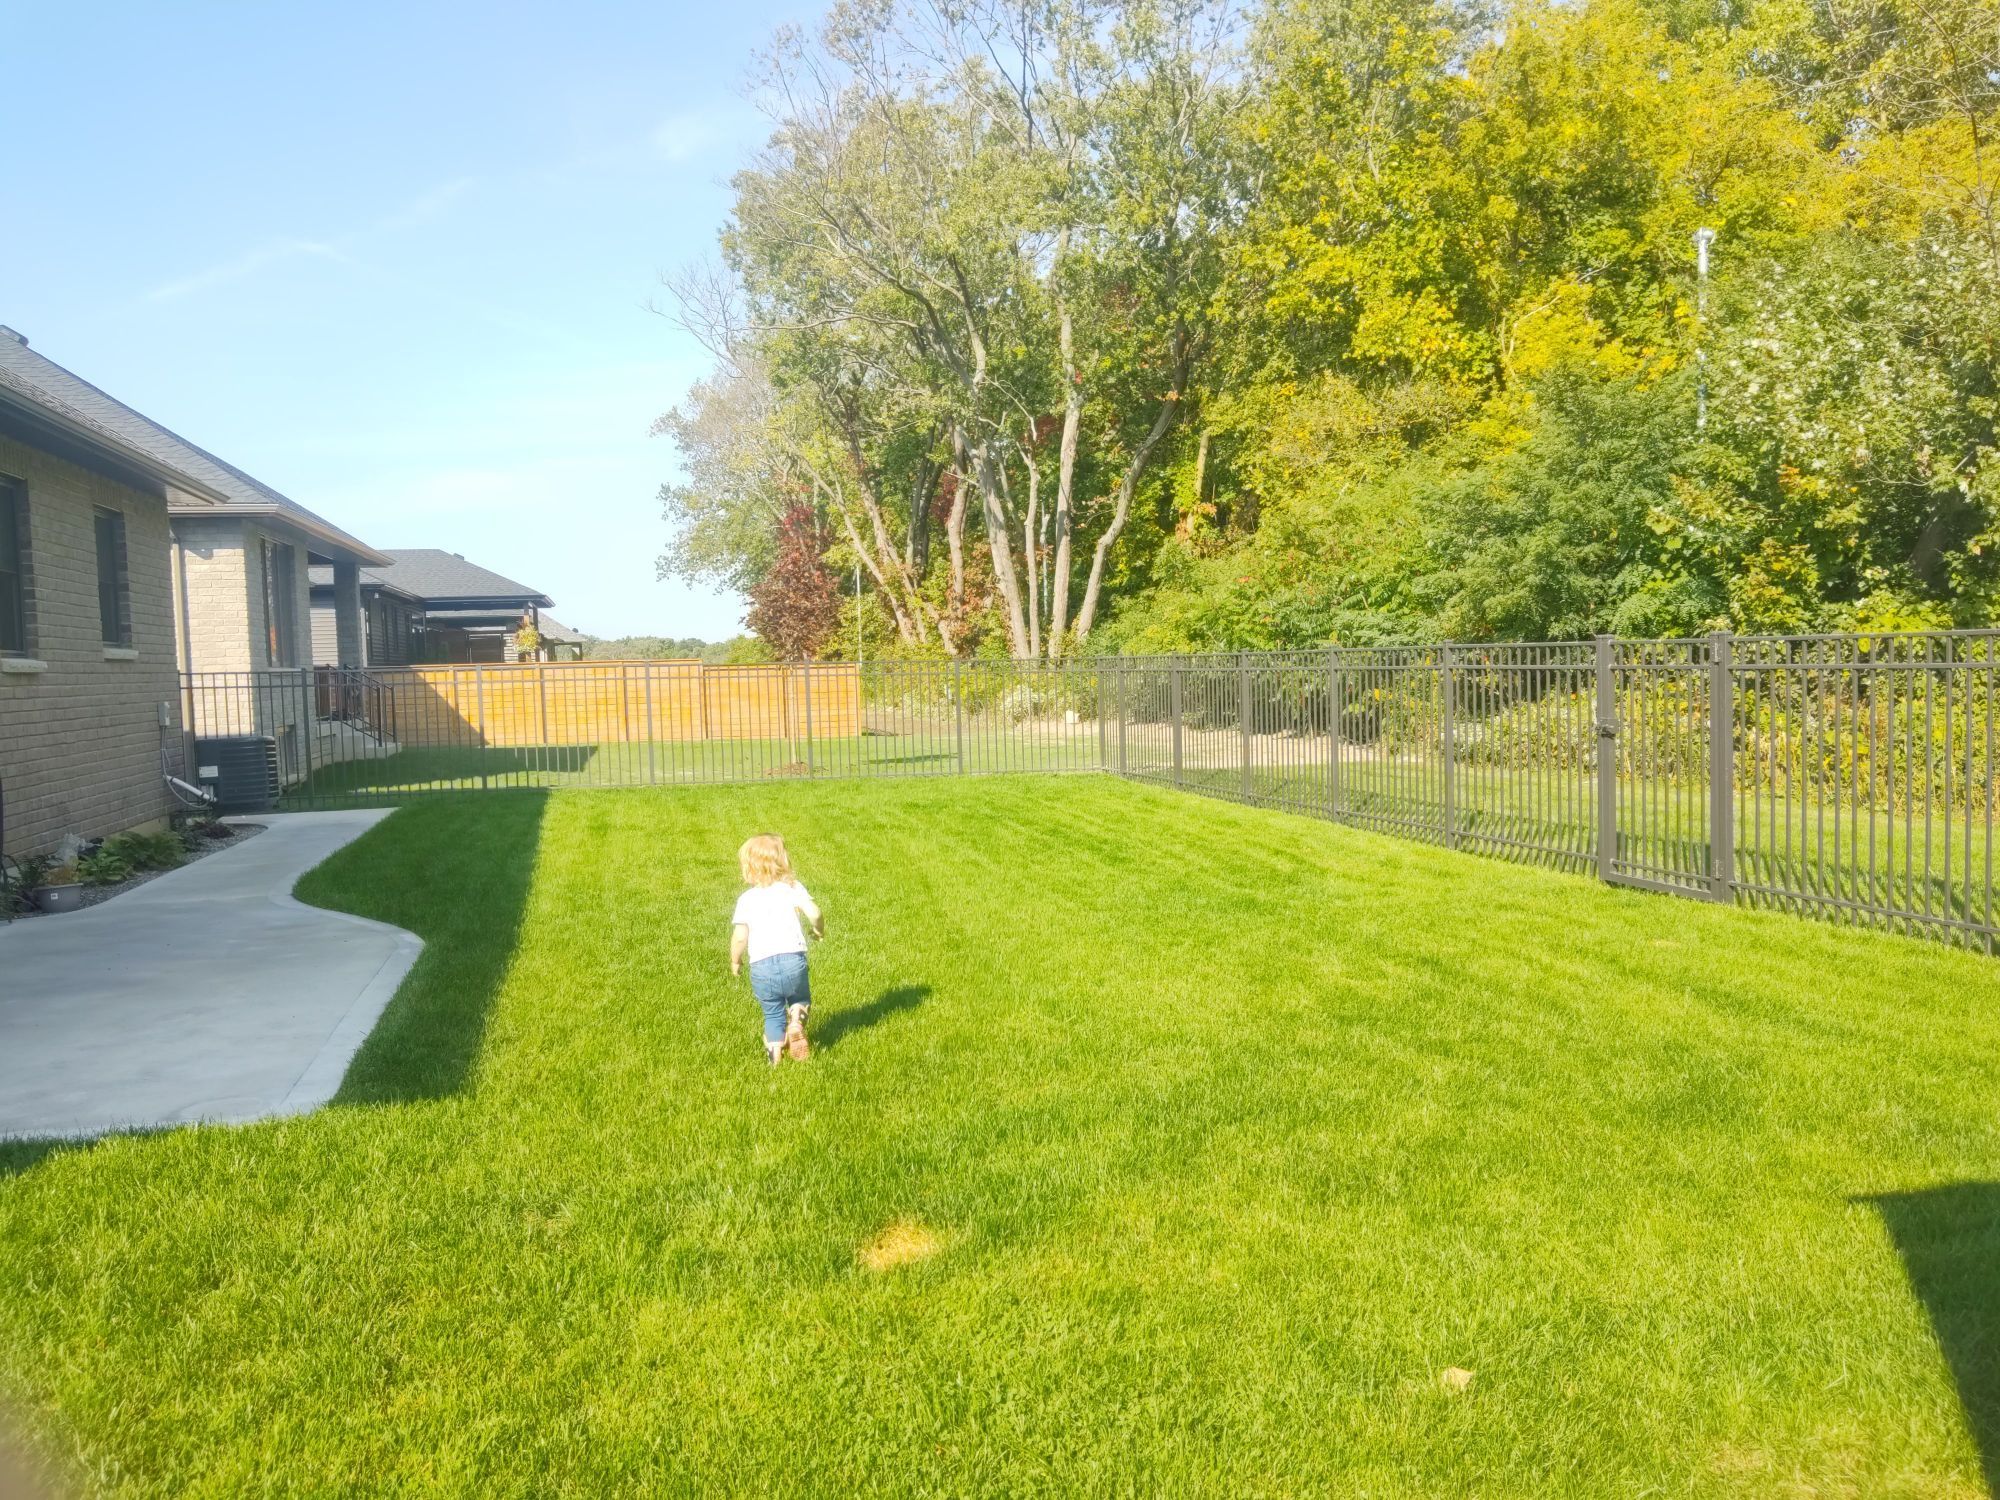 Saturday morning service call with my little girl. These fantastic customers had an issue with their fence, and I was able to respond quickly and get everything taken care of.